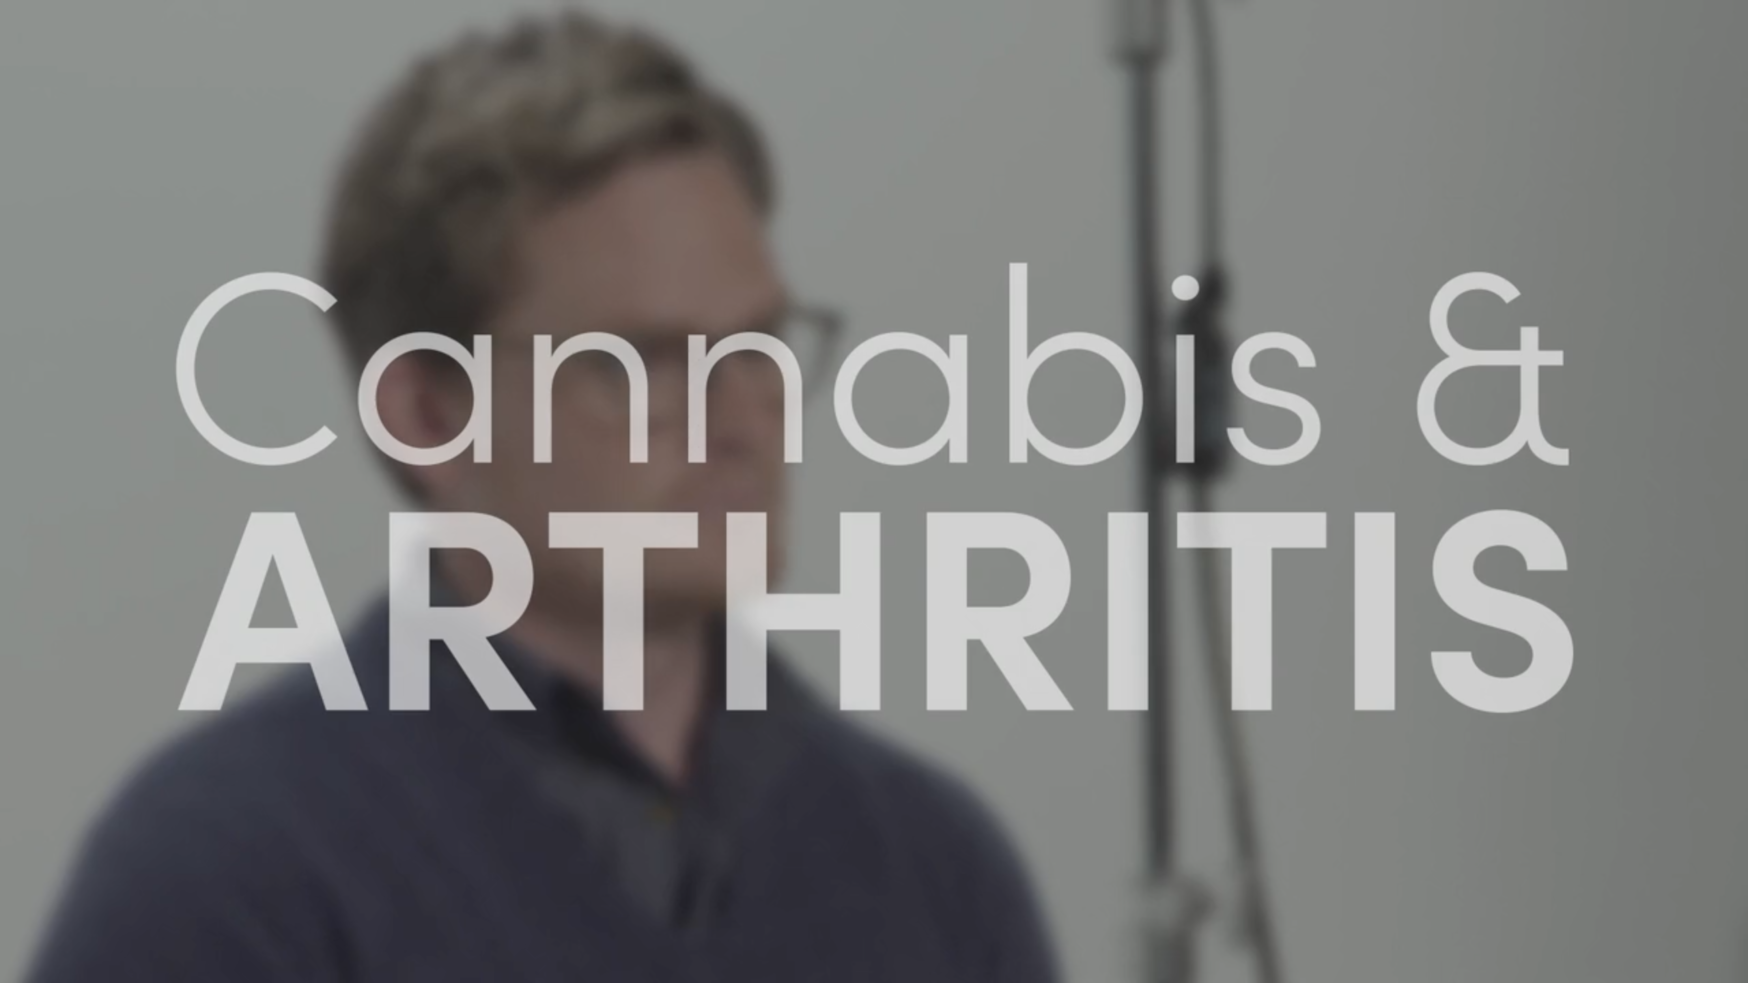 Cannabis can help arthritis with weed topicals